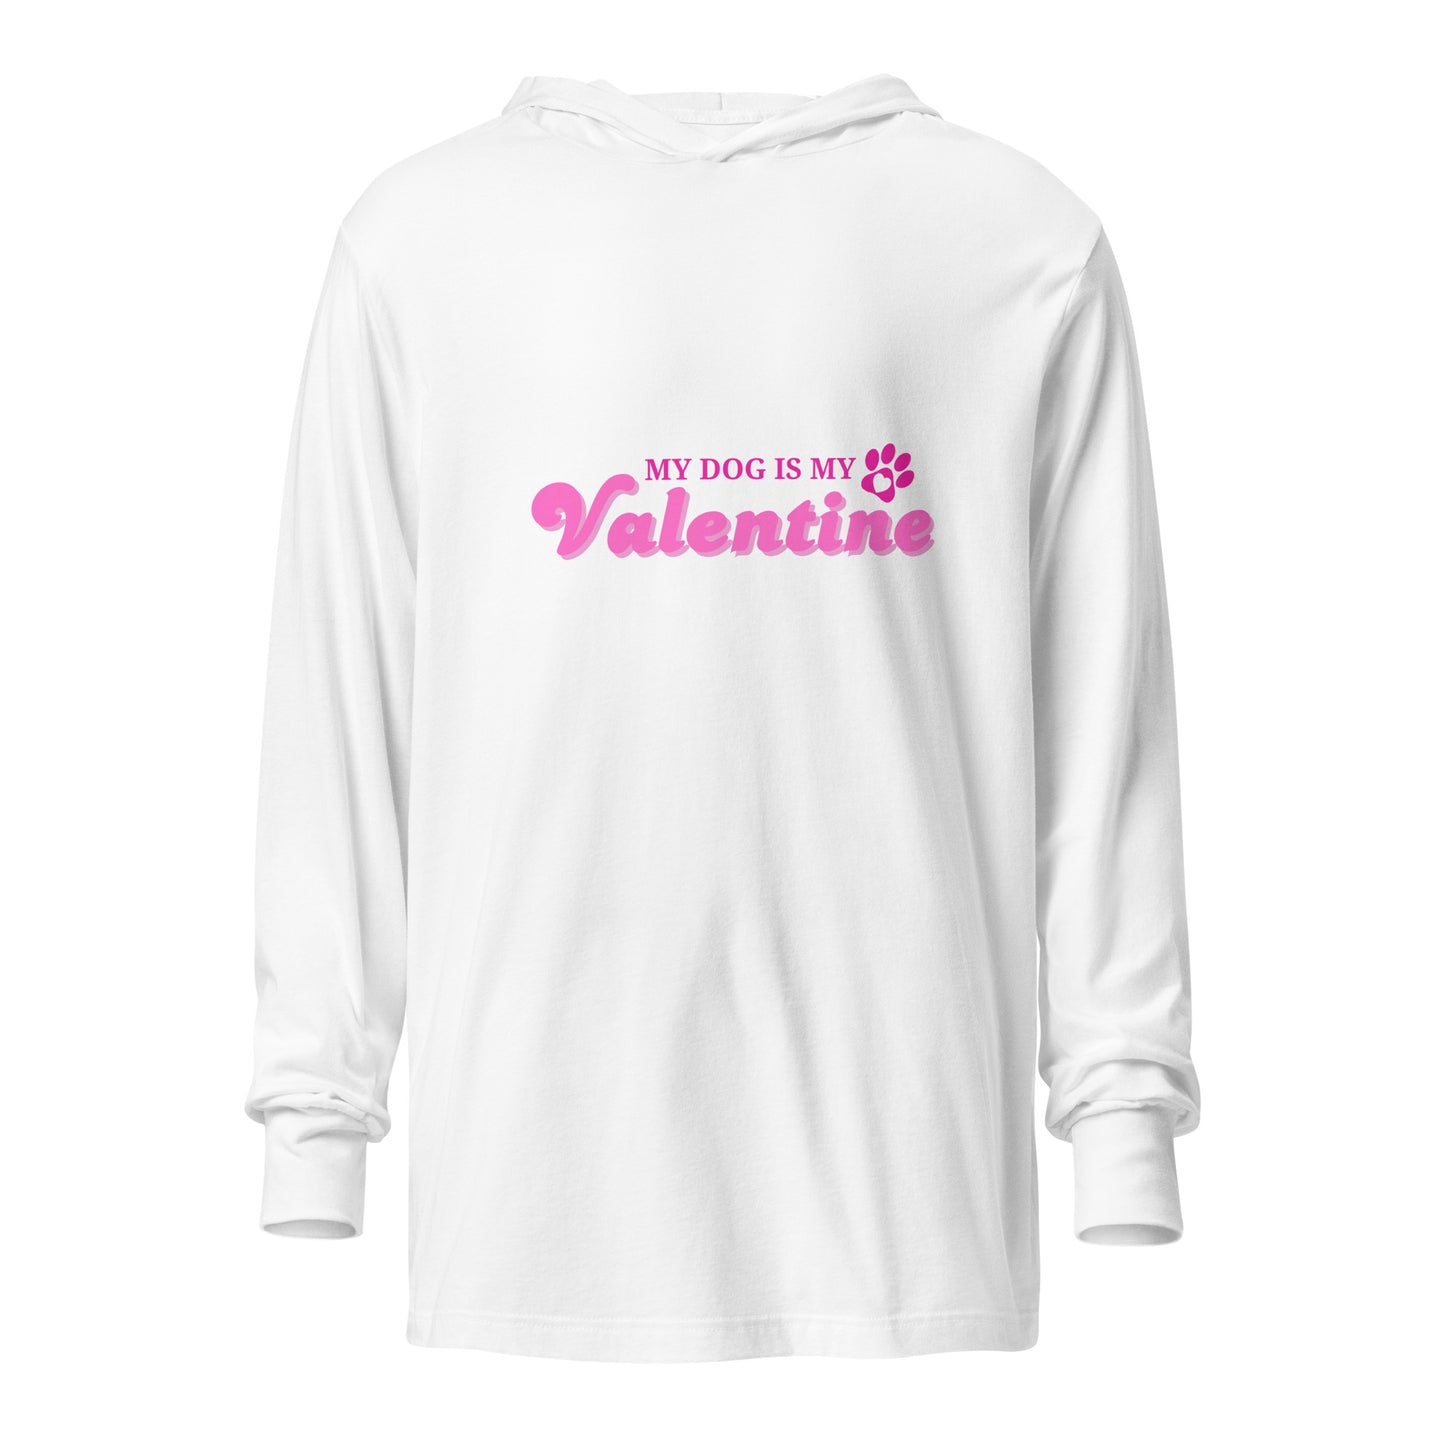 Unleashed Life My Dog Is My Valentine Hooded long-sleeve tee